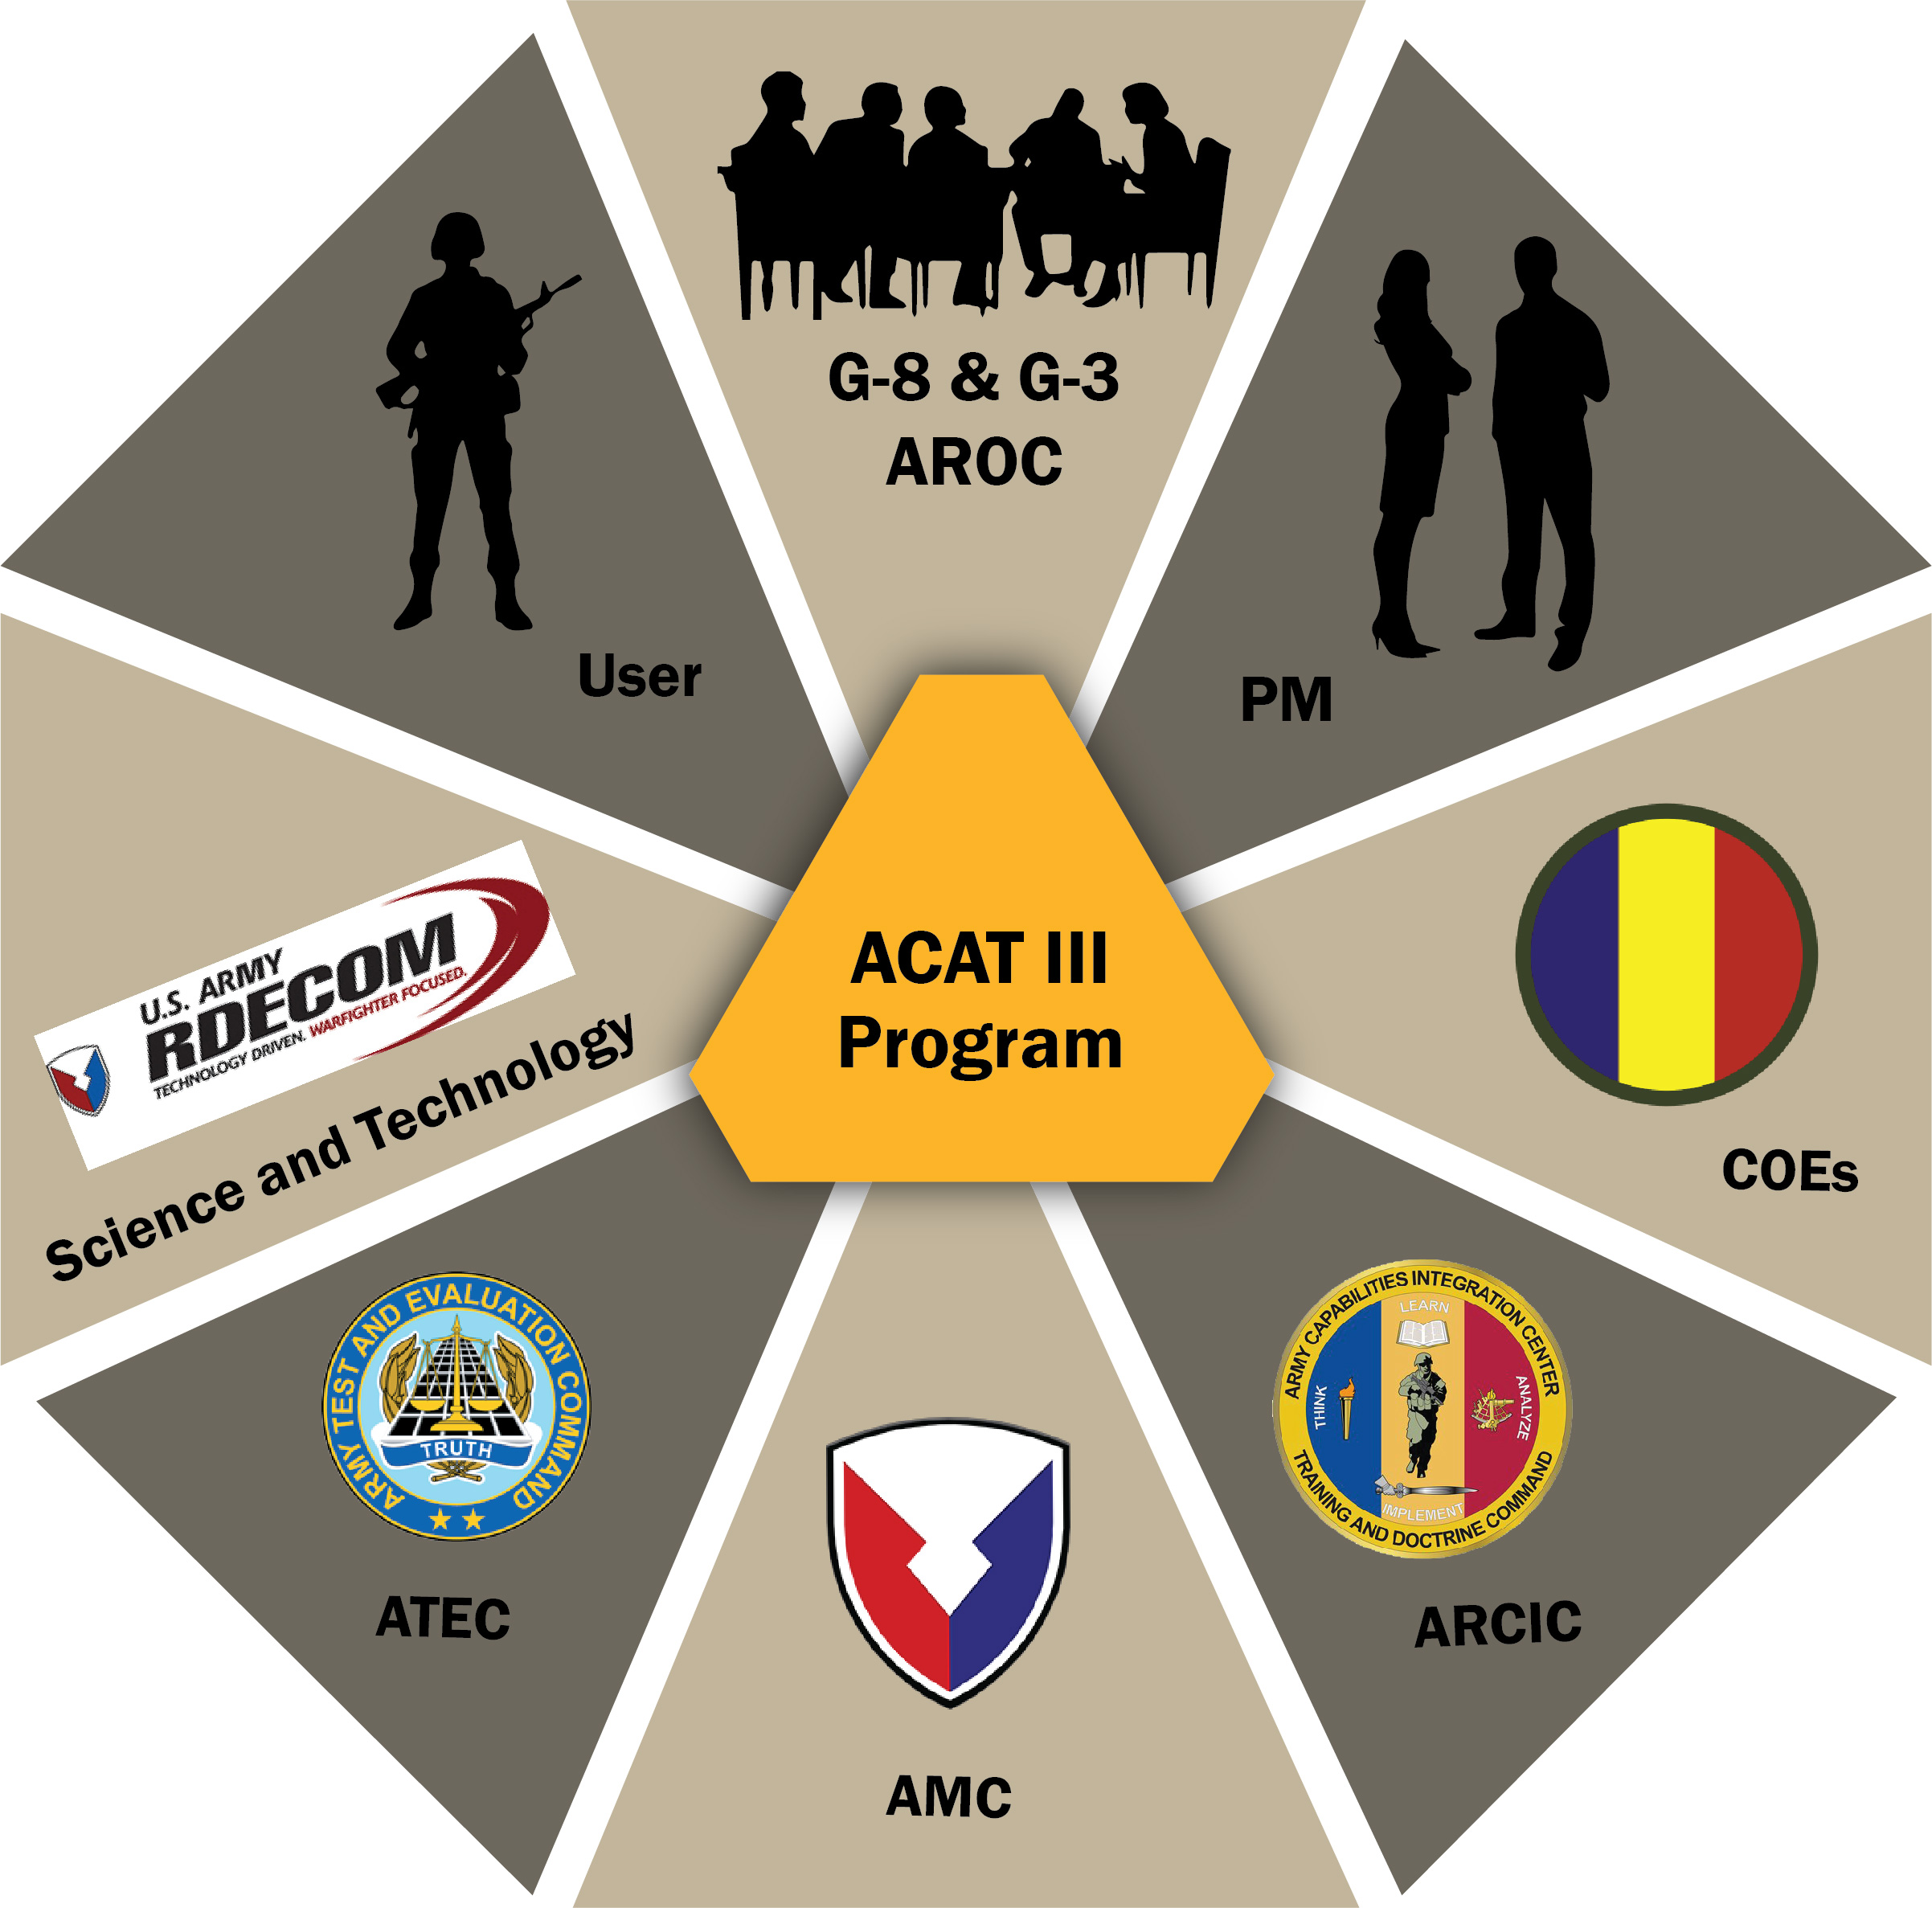 The requirements development process incorporates input from a variety of stakeholders, including Soldiers and researchers, the Army Requirements Oversight Council, the U.S. Army Test and Evaluation Command and the Army Capabilities Integration Center, considered the gatekeeper of the requirements documents. (SOURCE: Dr. Donald Schlomer, “Strategies for Exploring: ACAT III Requirement Approval Process,” 2017.)